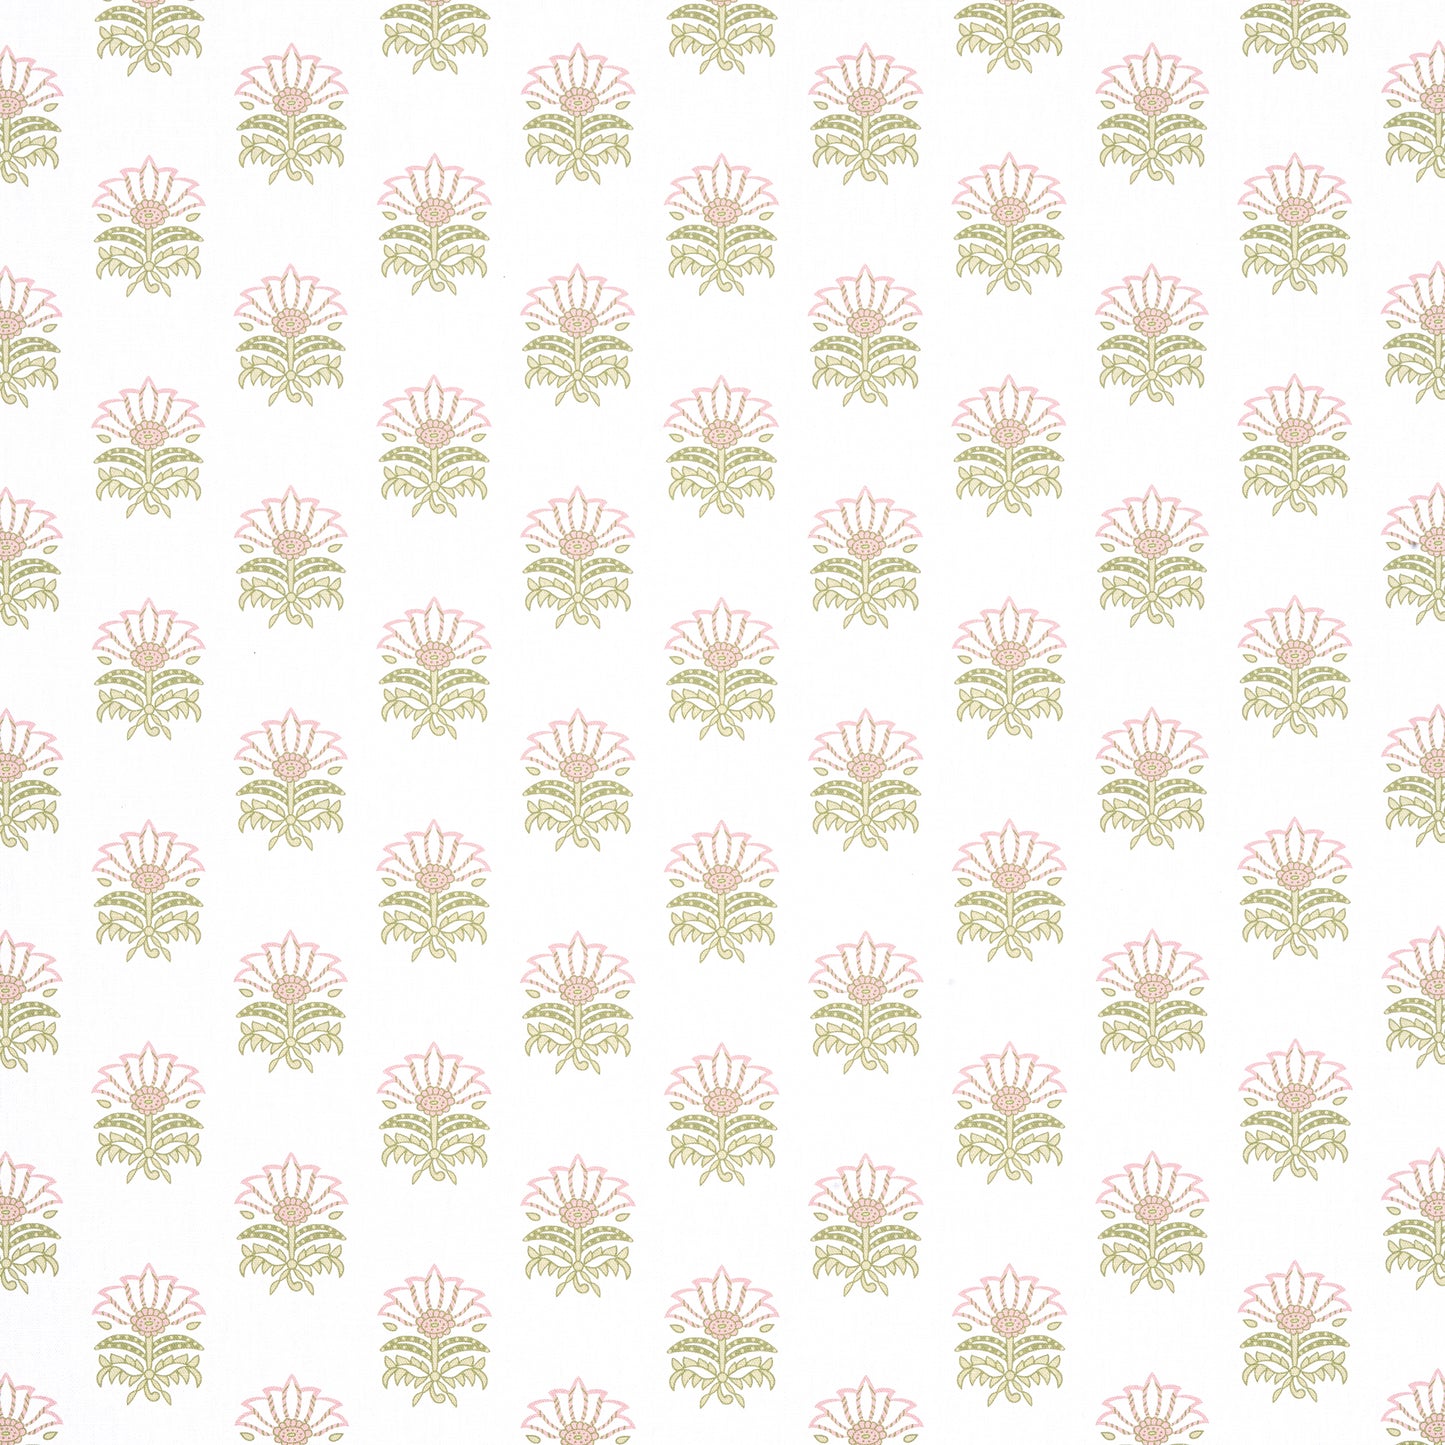 Purchase  Ann French Fabric SKU# AF15155  pattern name  Milford